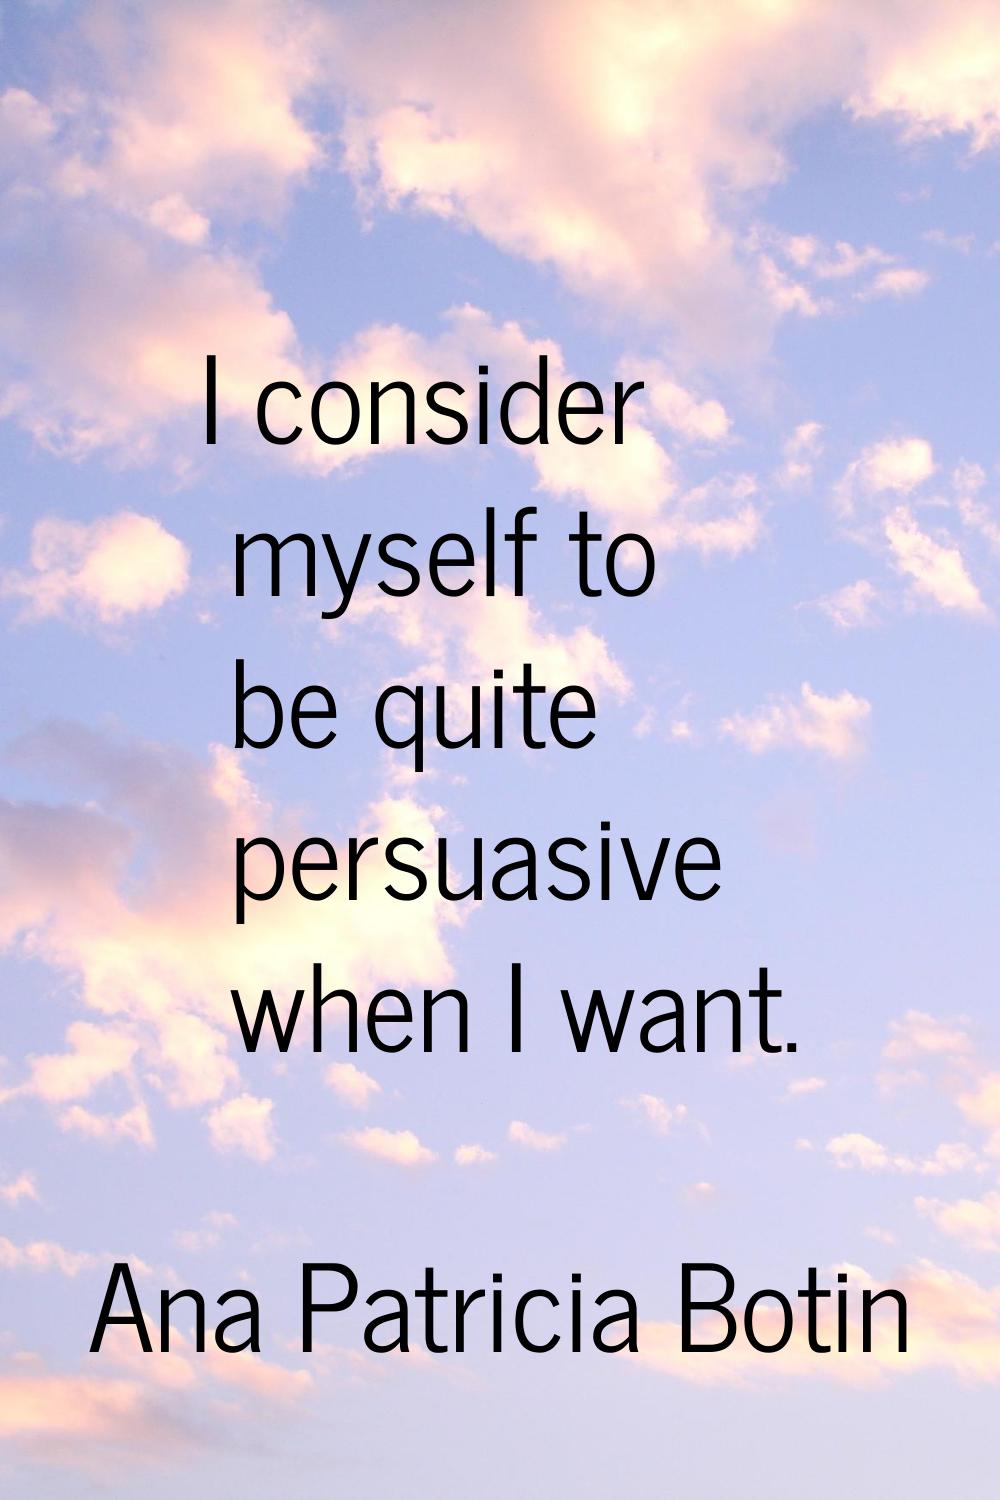 I consider myself to be quite persuasive when I want.